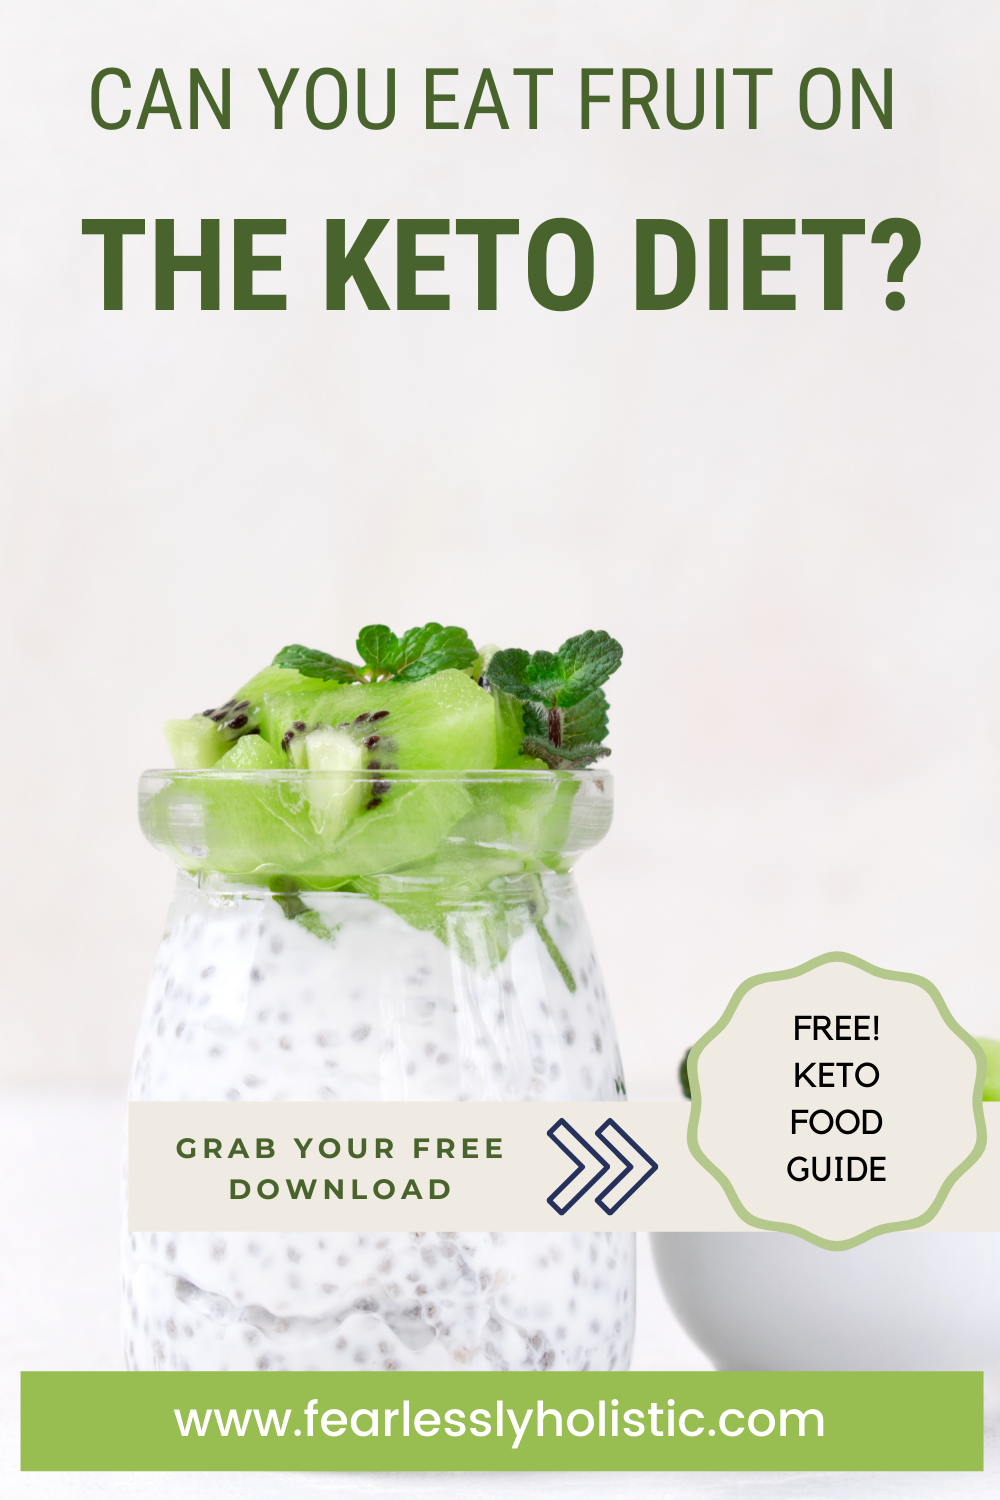 Can You Eat Fruit On The Keto Diet?